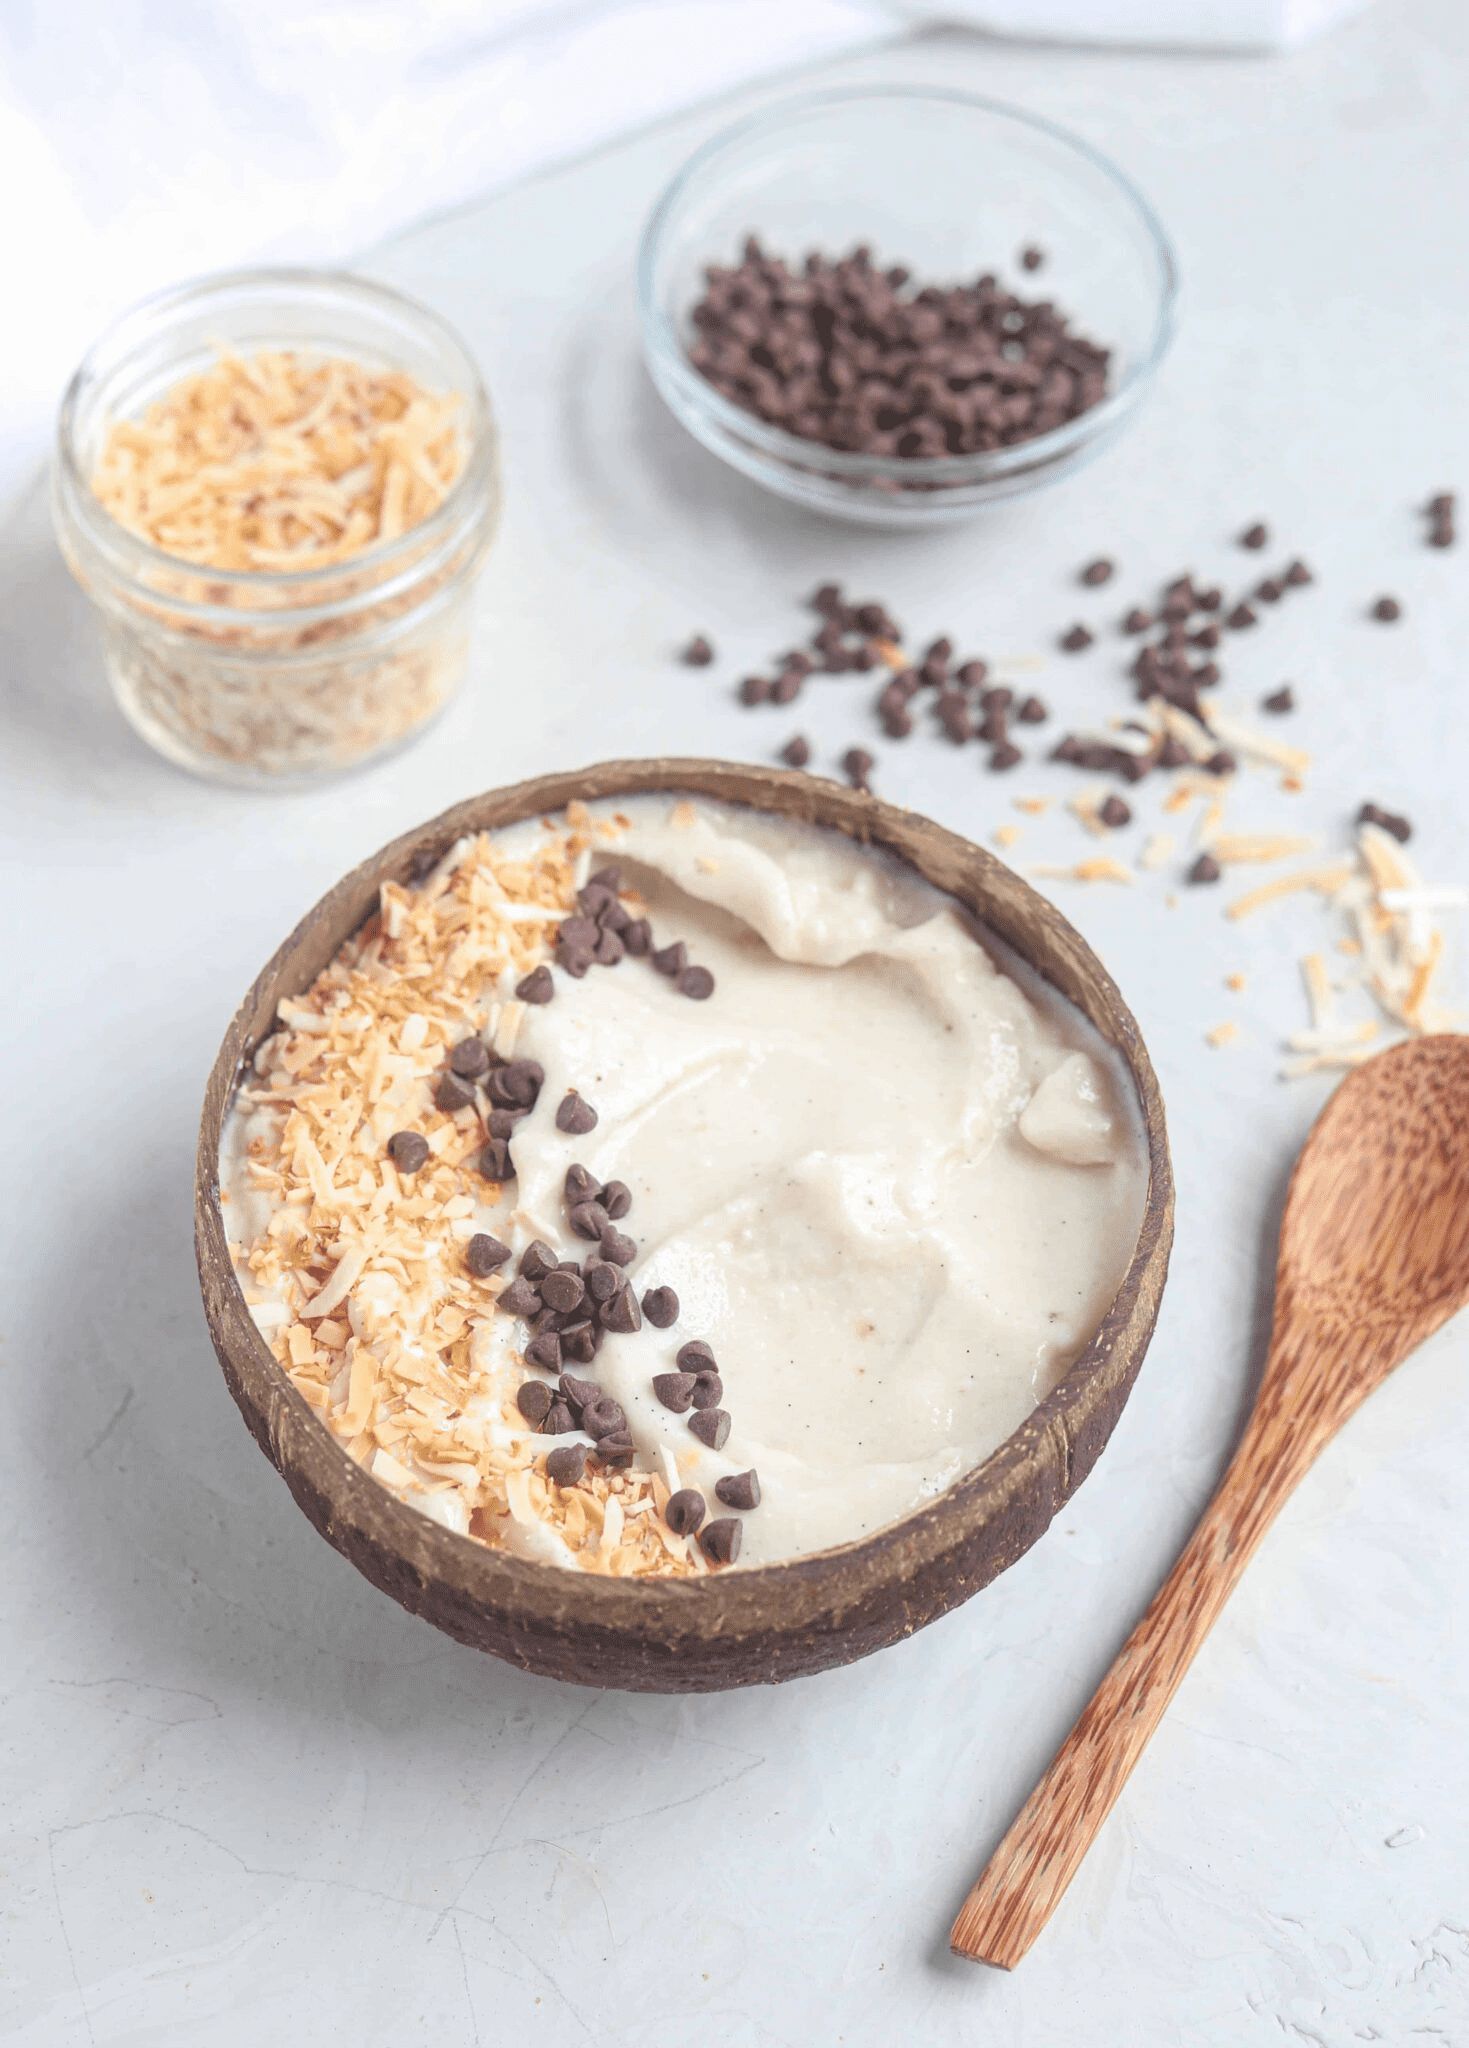 coconut vanilla smoothie bowl topped with toasted coconut and mini chocolate chips in a natural coconut shell.